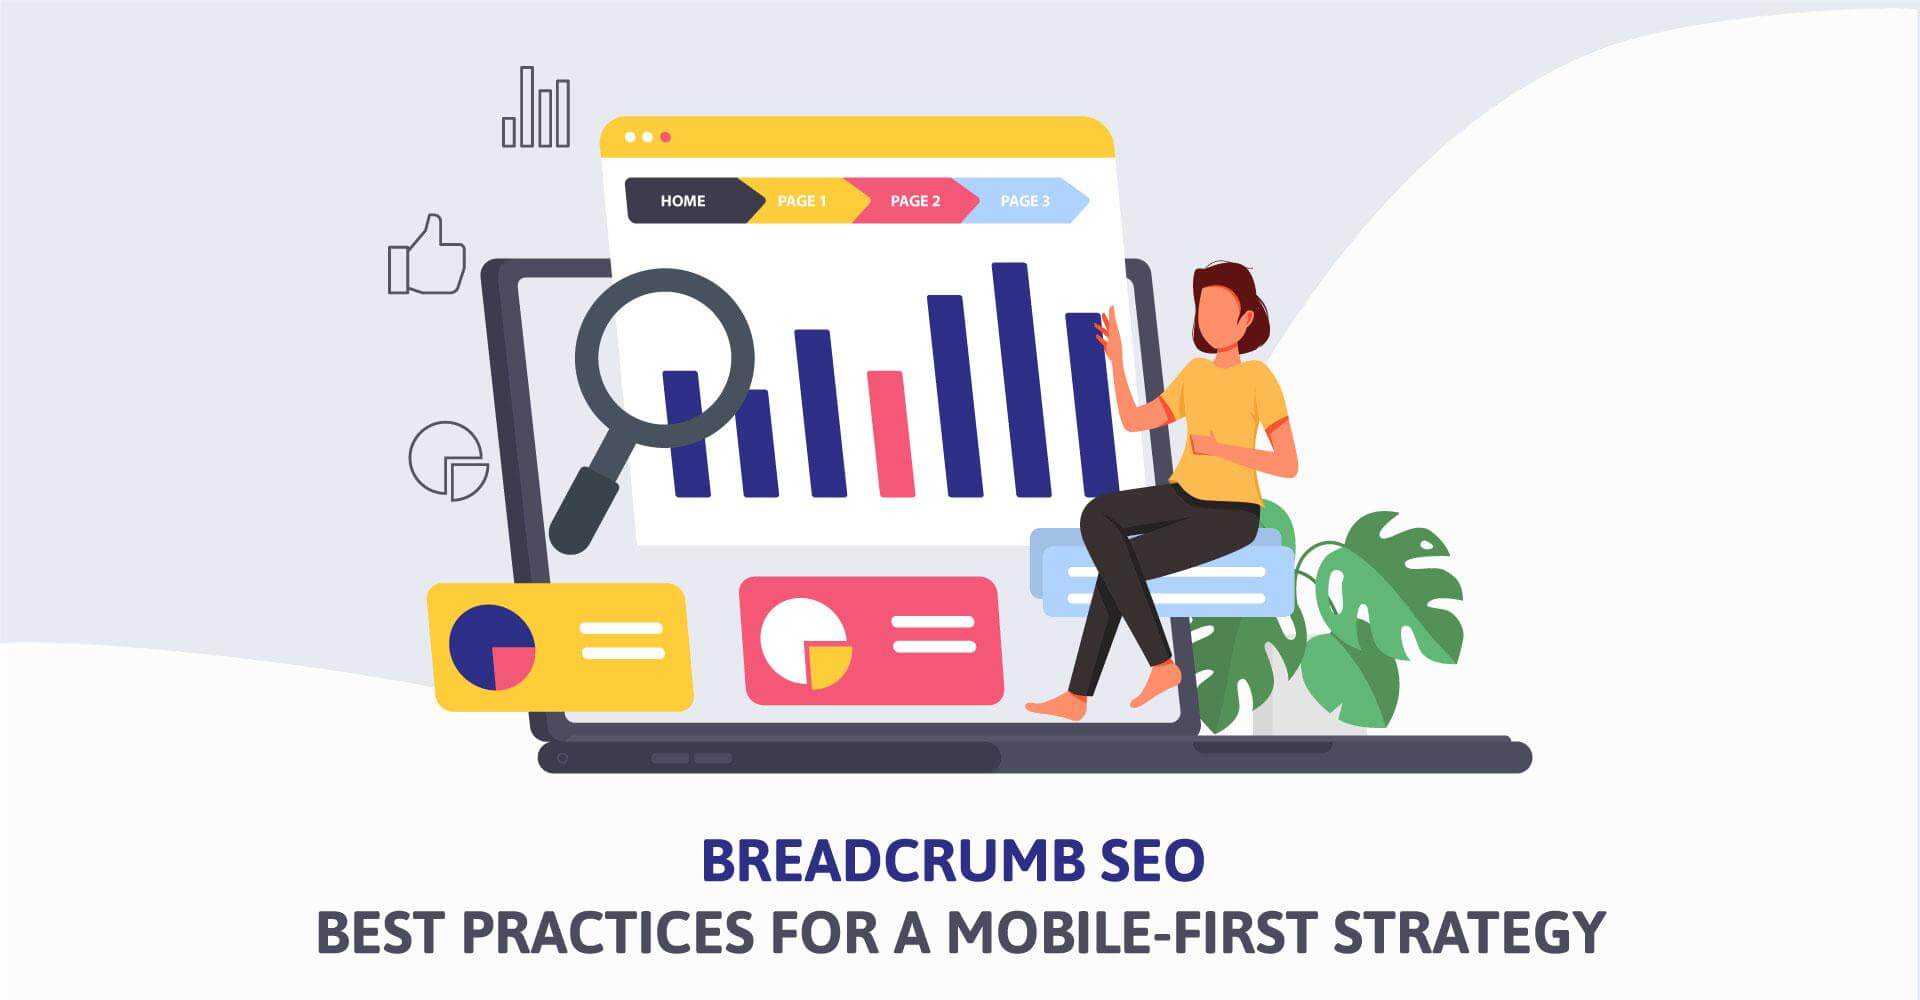 BREADCRUMB SEO
BEST PRACTICES FOR A MOBILE-FIRST STRATEGY